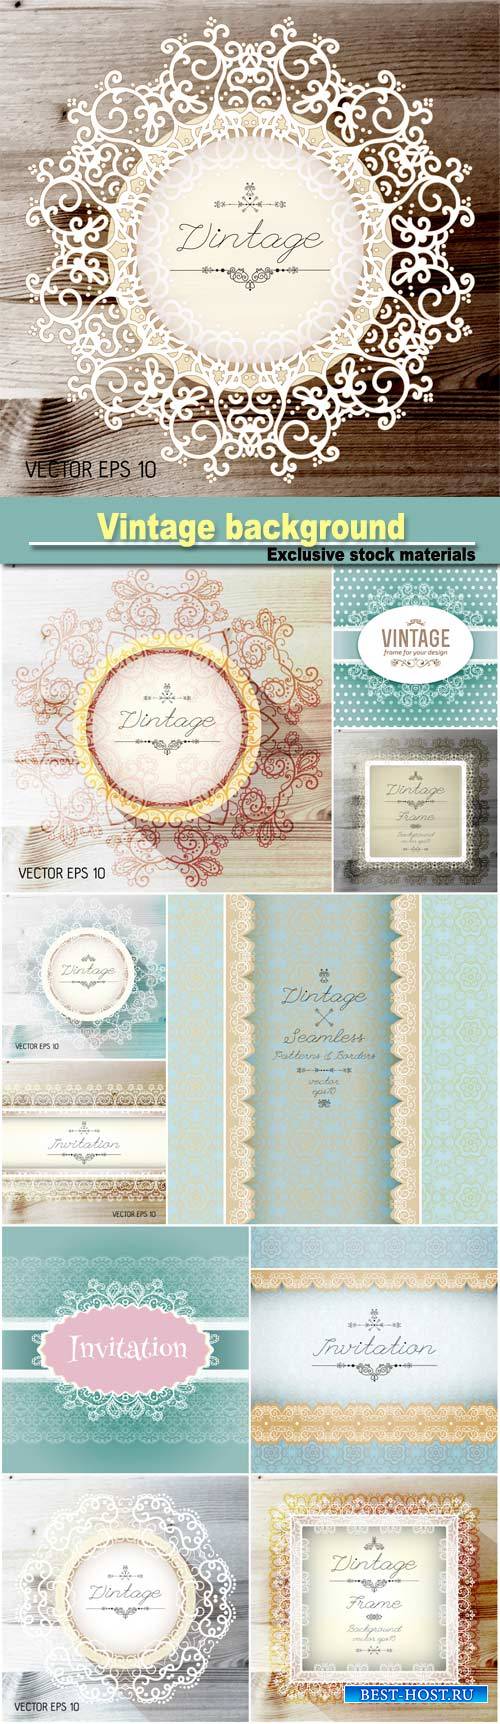 Vintage seamless background and border, invitation with lace, vector